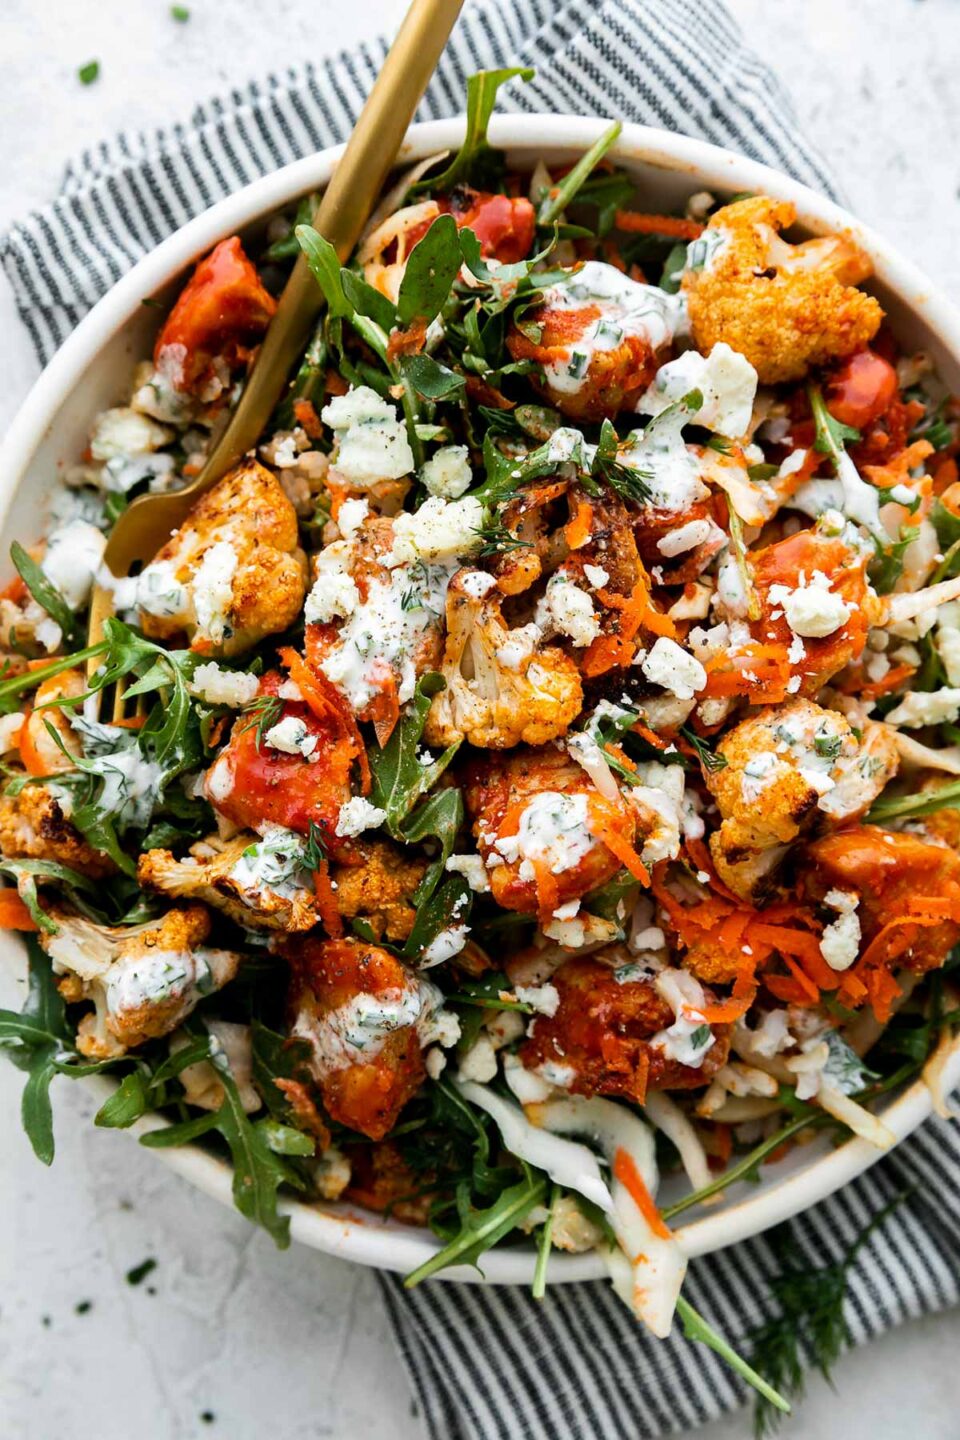 An overhead shot of an assembled & finished Hearty Buffalo Chicken bowl. The bowl is made with cooked brown rice, a bed of arugula, finely shredded cabbage, easy skillet buffalo chicken, roasted cauliflower, grated carrots, cheese, and herby ranch yogurt drizzle over top. The bowls sits atop a creamy white textured surface with a blue and white striped linen napkin resting underneath. A gold fork rests inside of the buffalo chicken rice bowl.